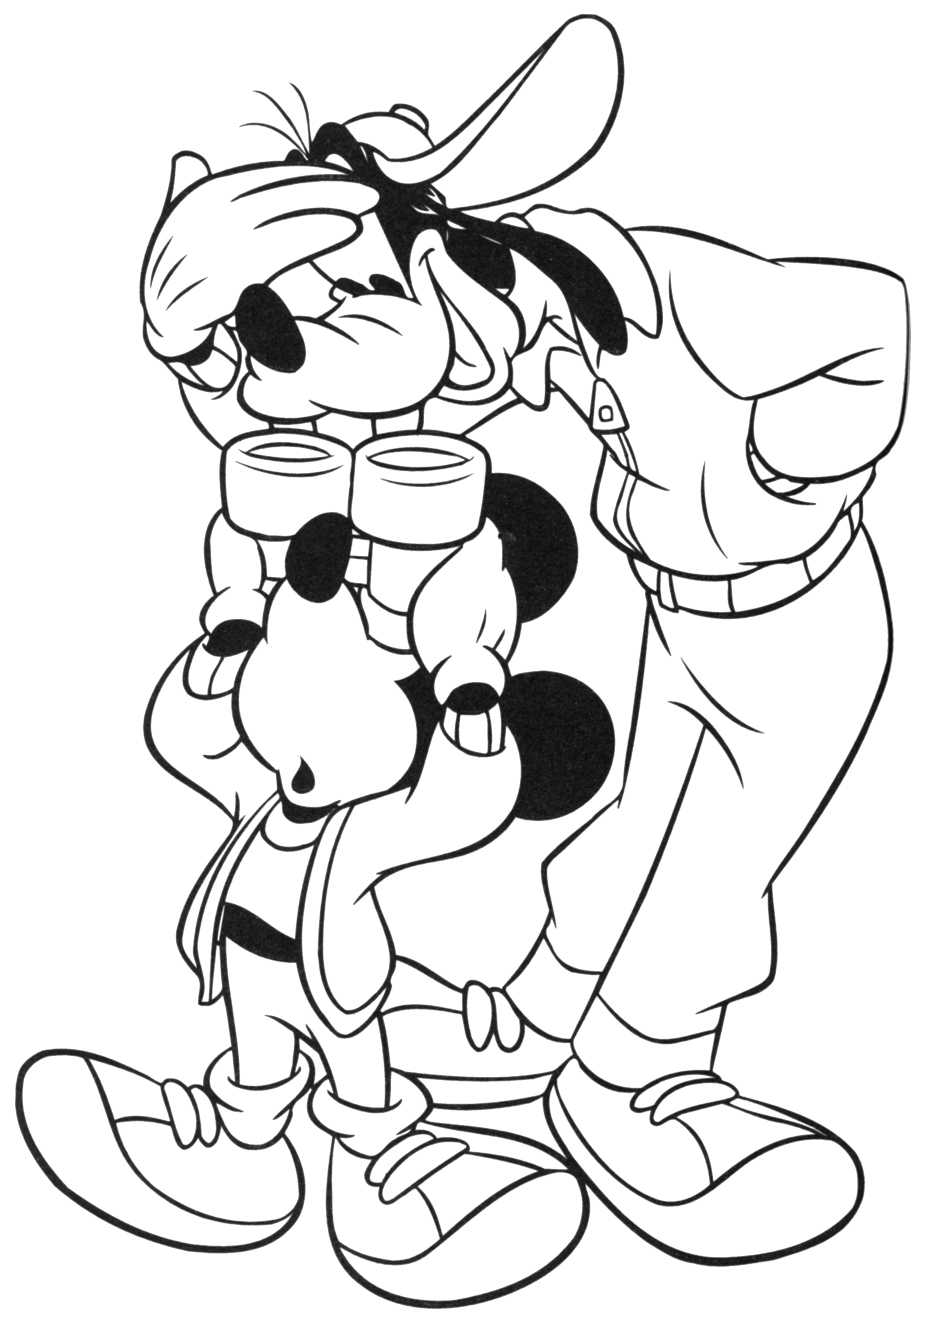 Mickey Mouse Coloring Pages Pdf (17 Image) - Colorings.net